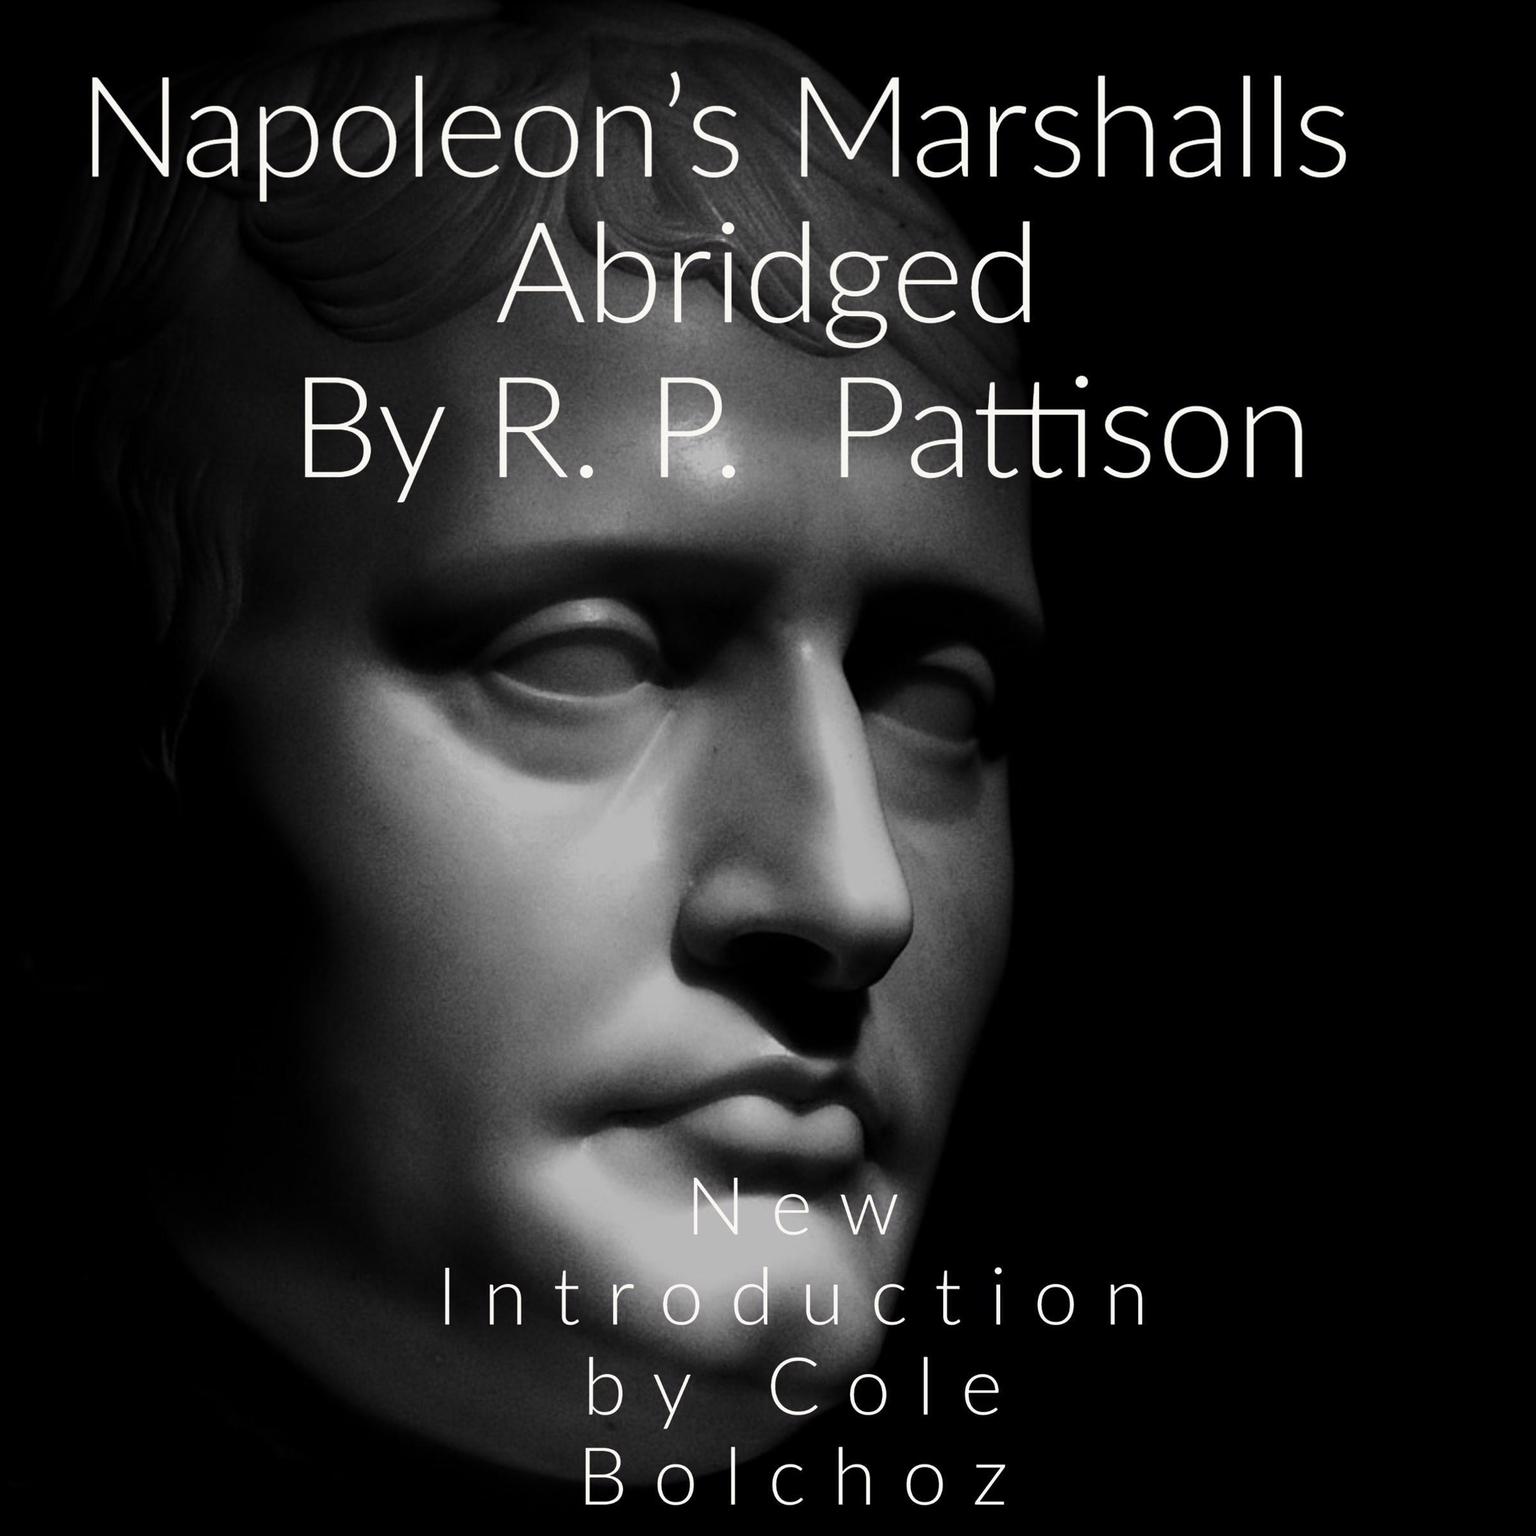 Napoleons Marshalls (Abridged): New Introduction by Cole Bolchoz Audiobook, by R. P. Pattison